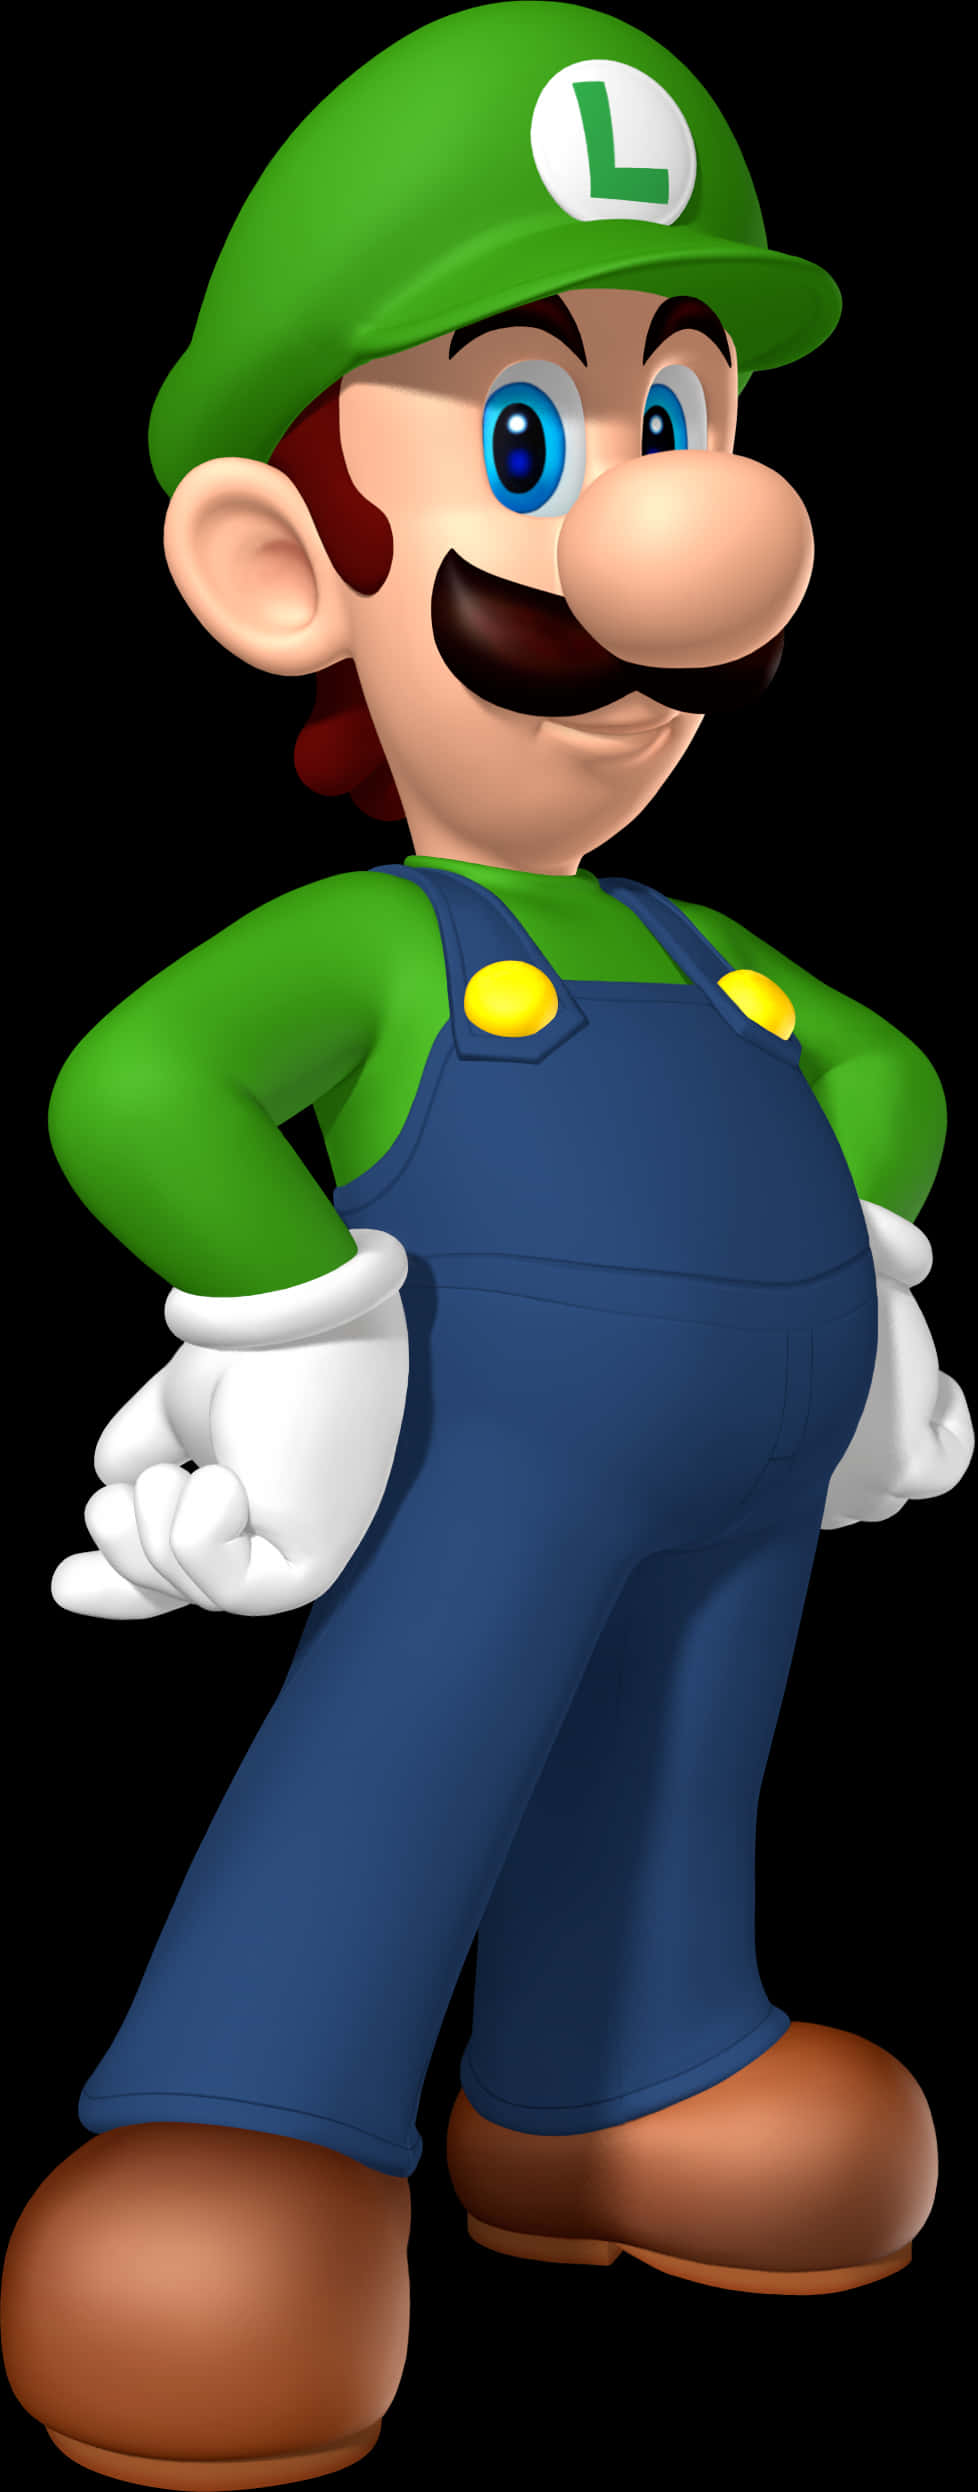 A Cartoon Character Wearing Blue Overalls And Green Shirt